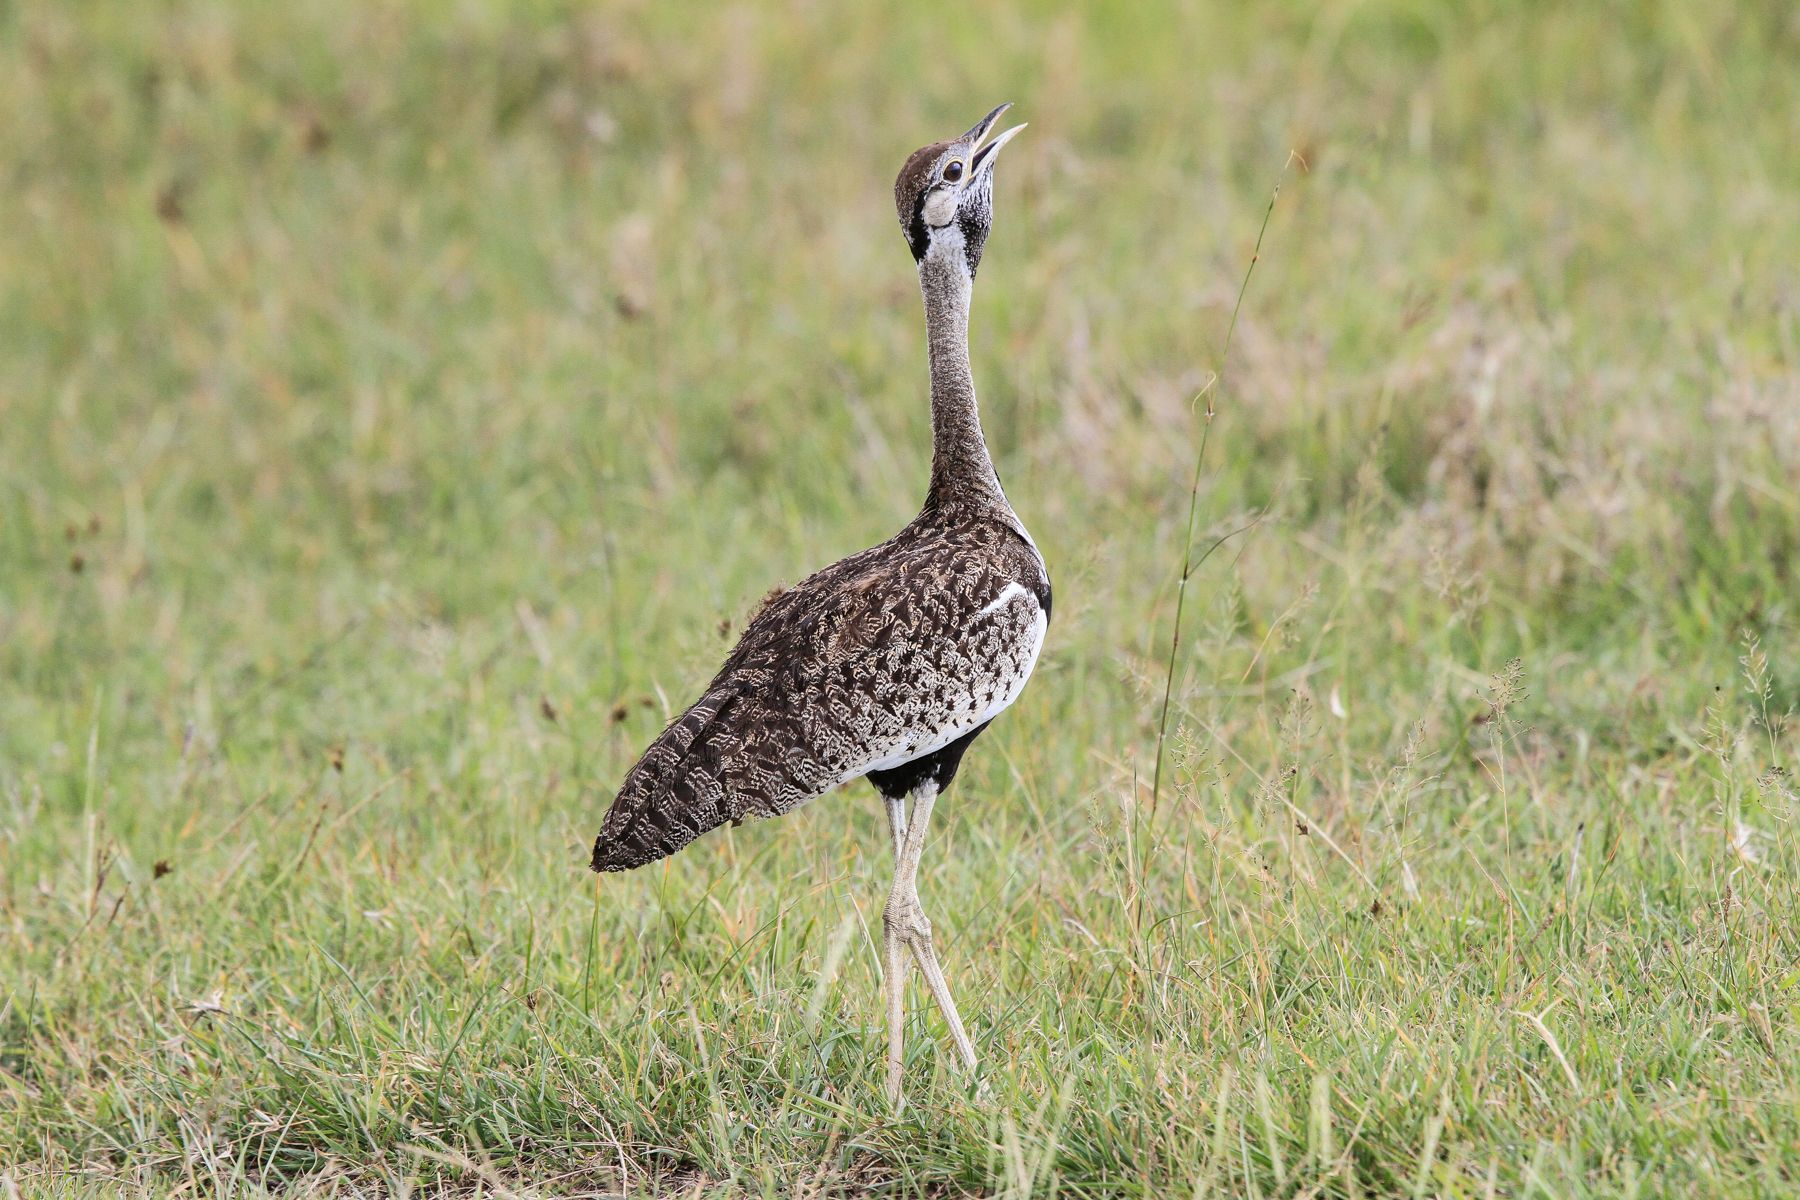 The smaller Black-bellied Bustard gives its 'popping' call